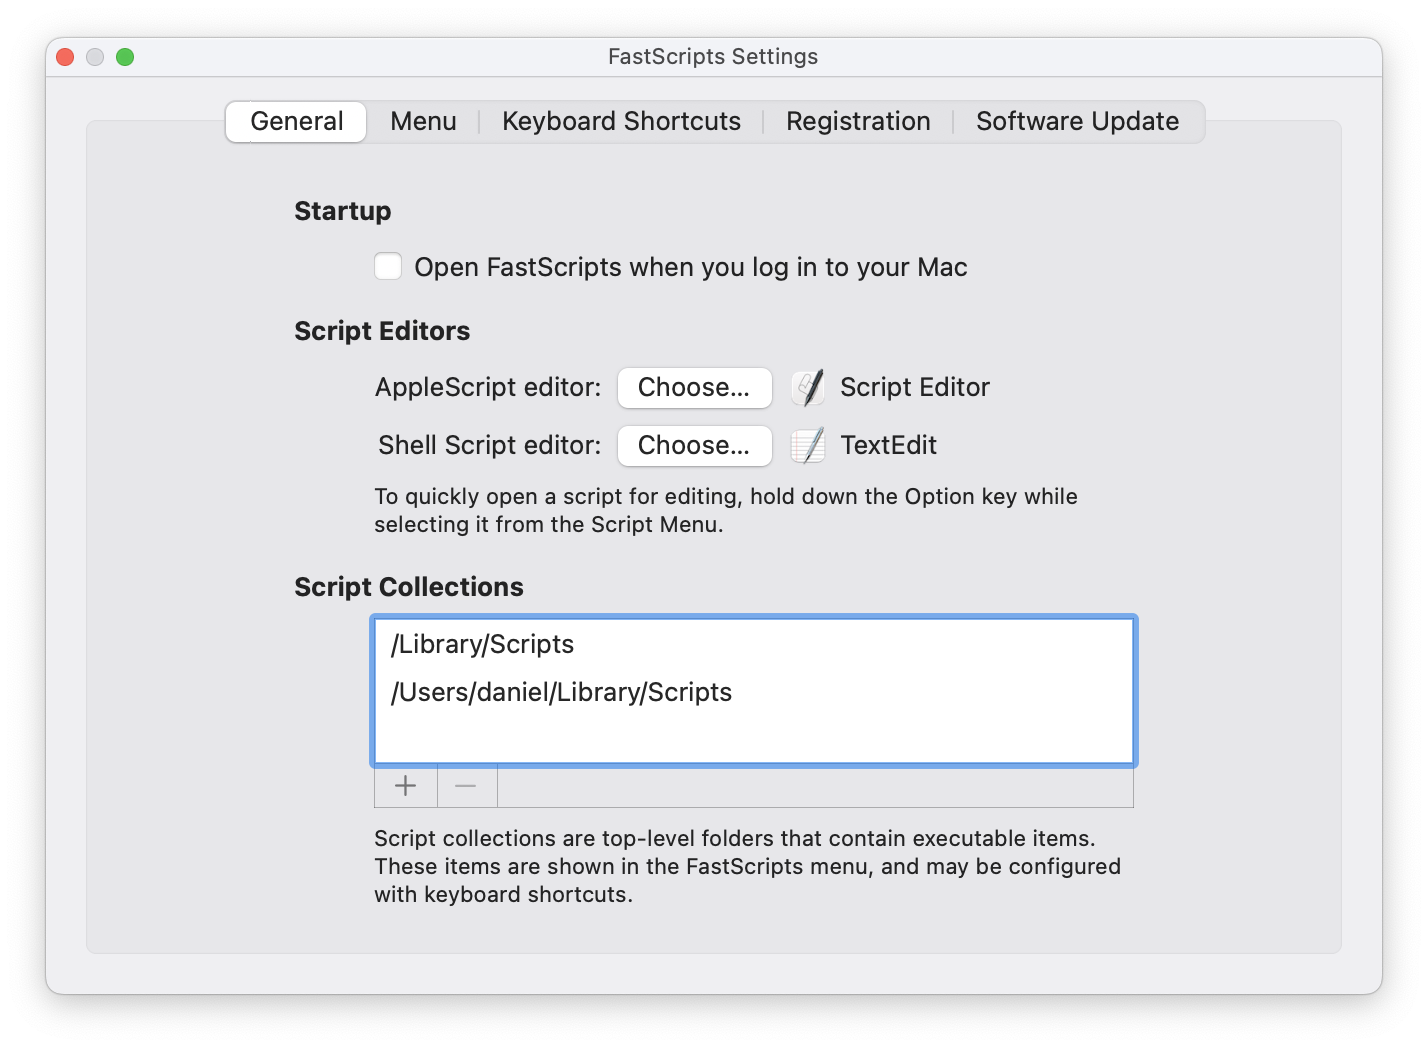 screenshot of the preferences window for FastScripts for Mac, including an option offering users the ability to add or remove script folders from the list of configured “script collections” used in the app.